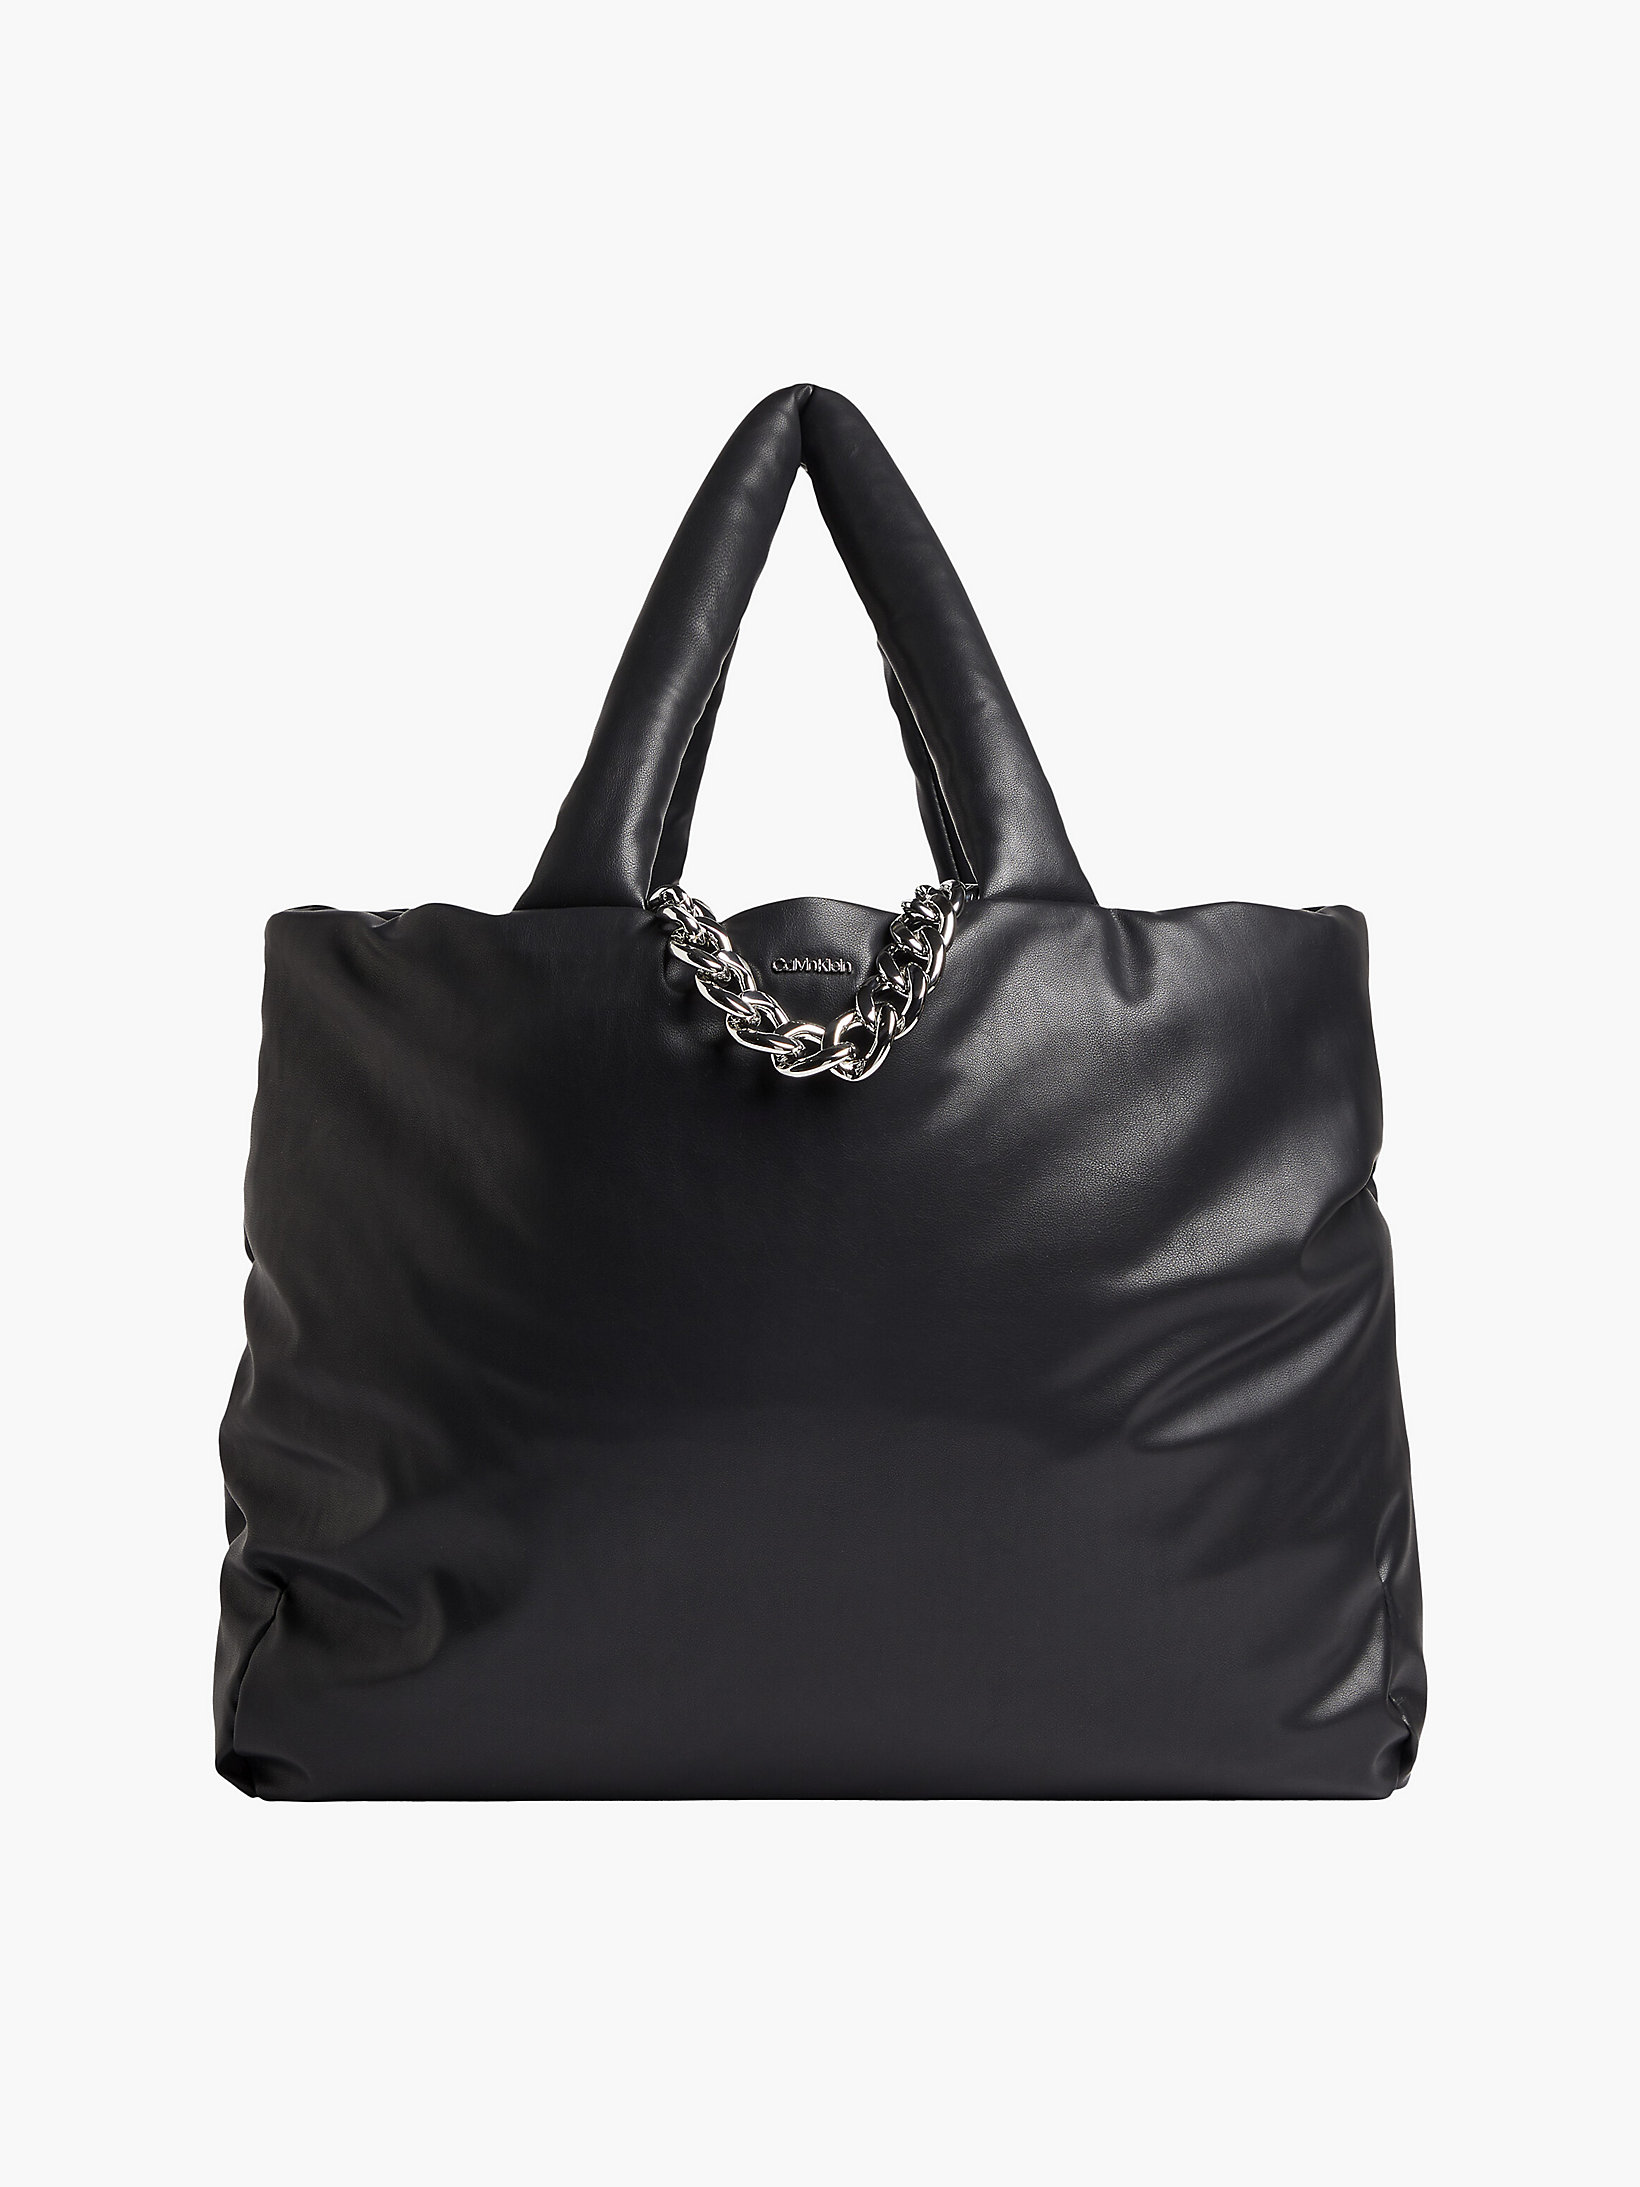 CK Black Large Recycled Puffer Tote Bag undefined women Calvin Klein